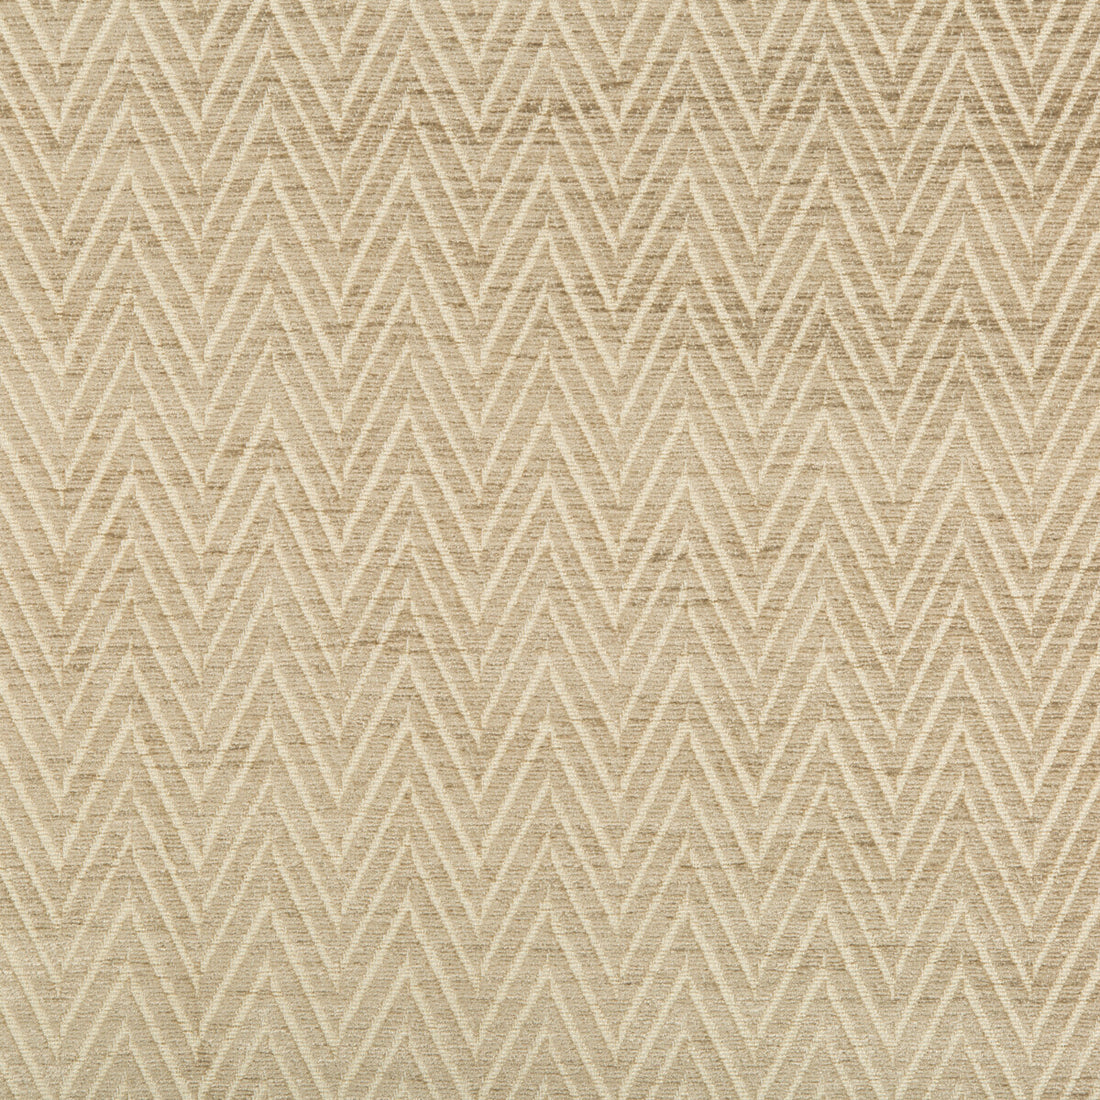 Kravet Contract fabric in 34743-116 color - pattern 34743.116.0 - by Kravet Contract in the Incase Crypton Gis collection